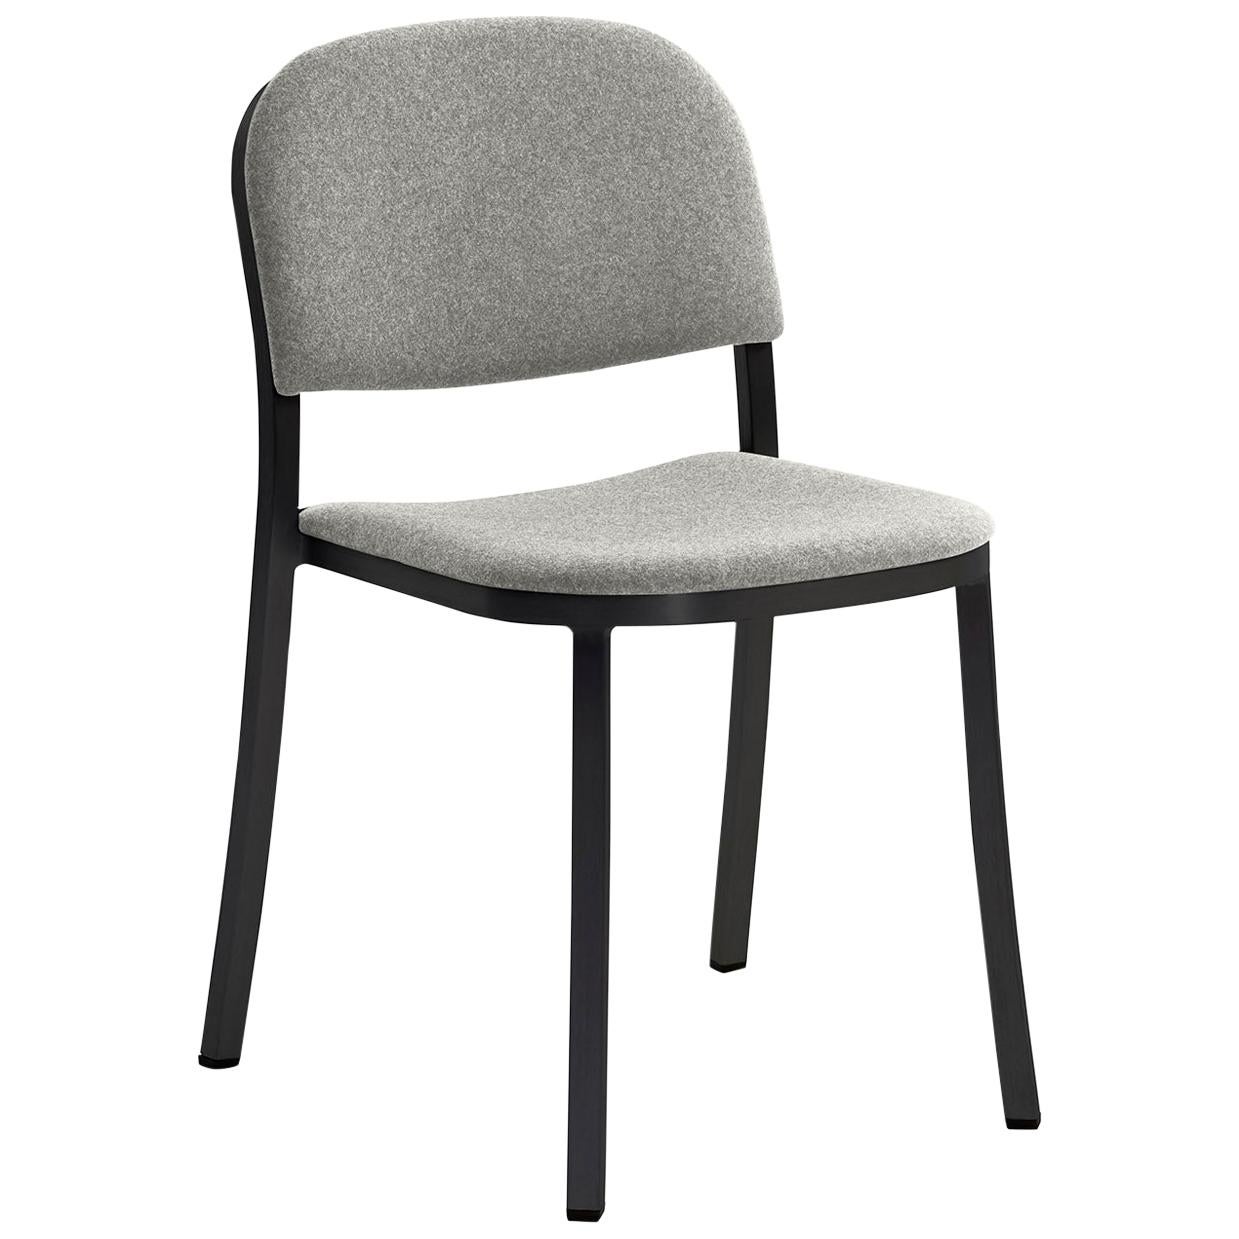 Emeco 1 Inch Stacking Chair with Grey Upholstery & Black Legs by Jasper Morrison